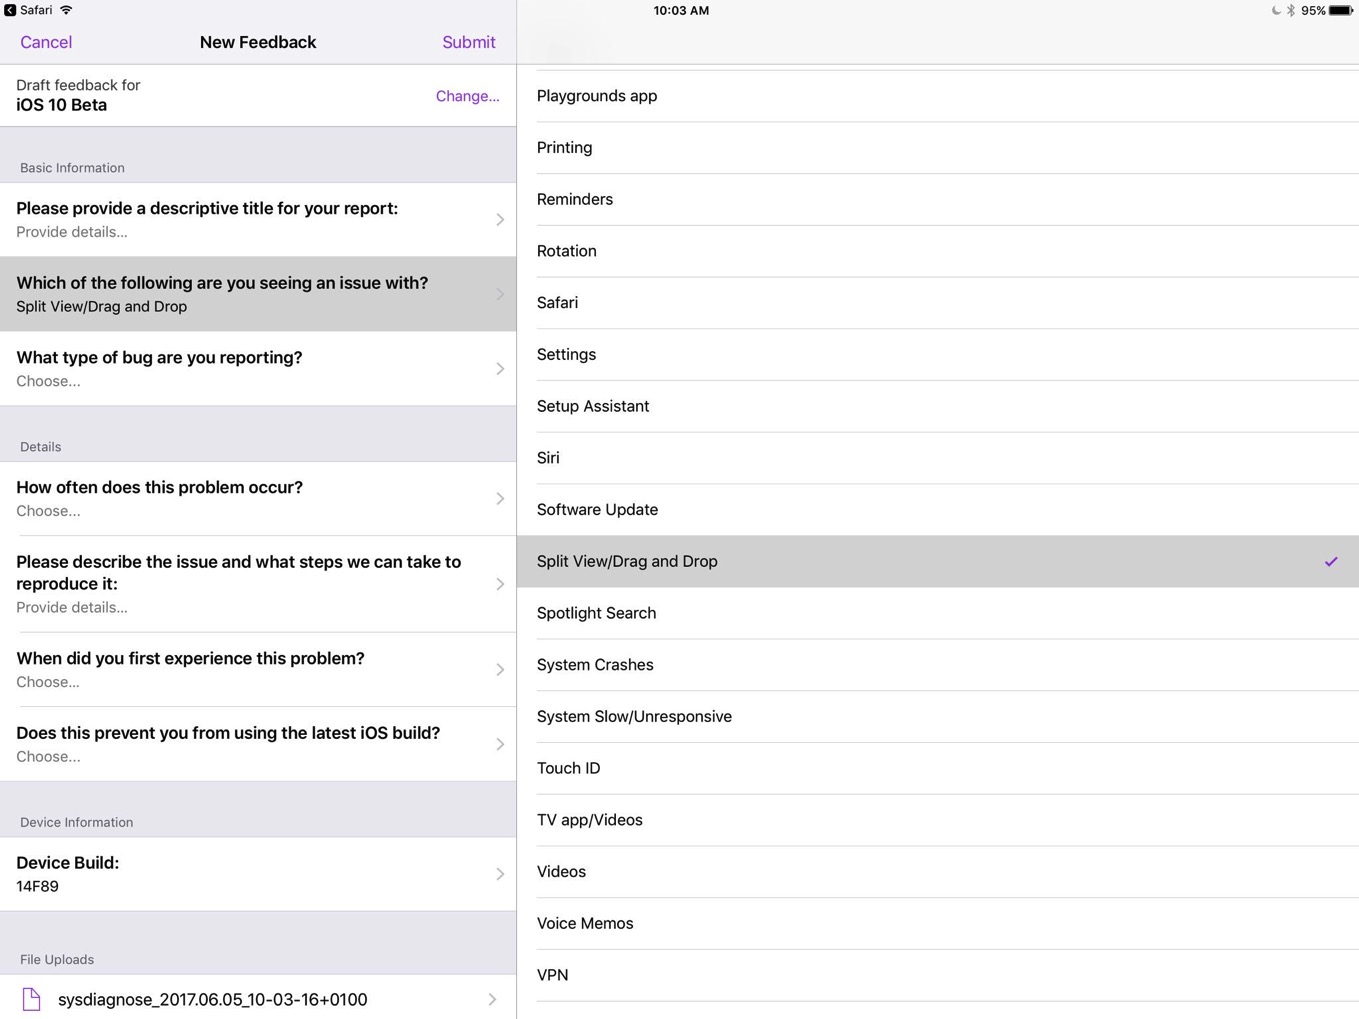 Apple Feedback app drag and drop references